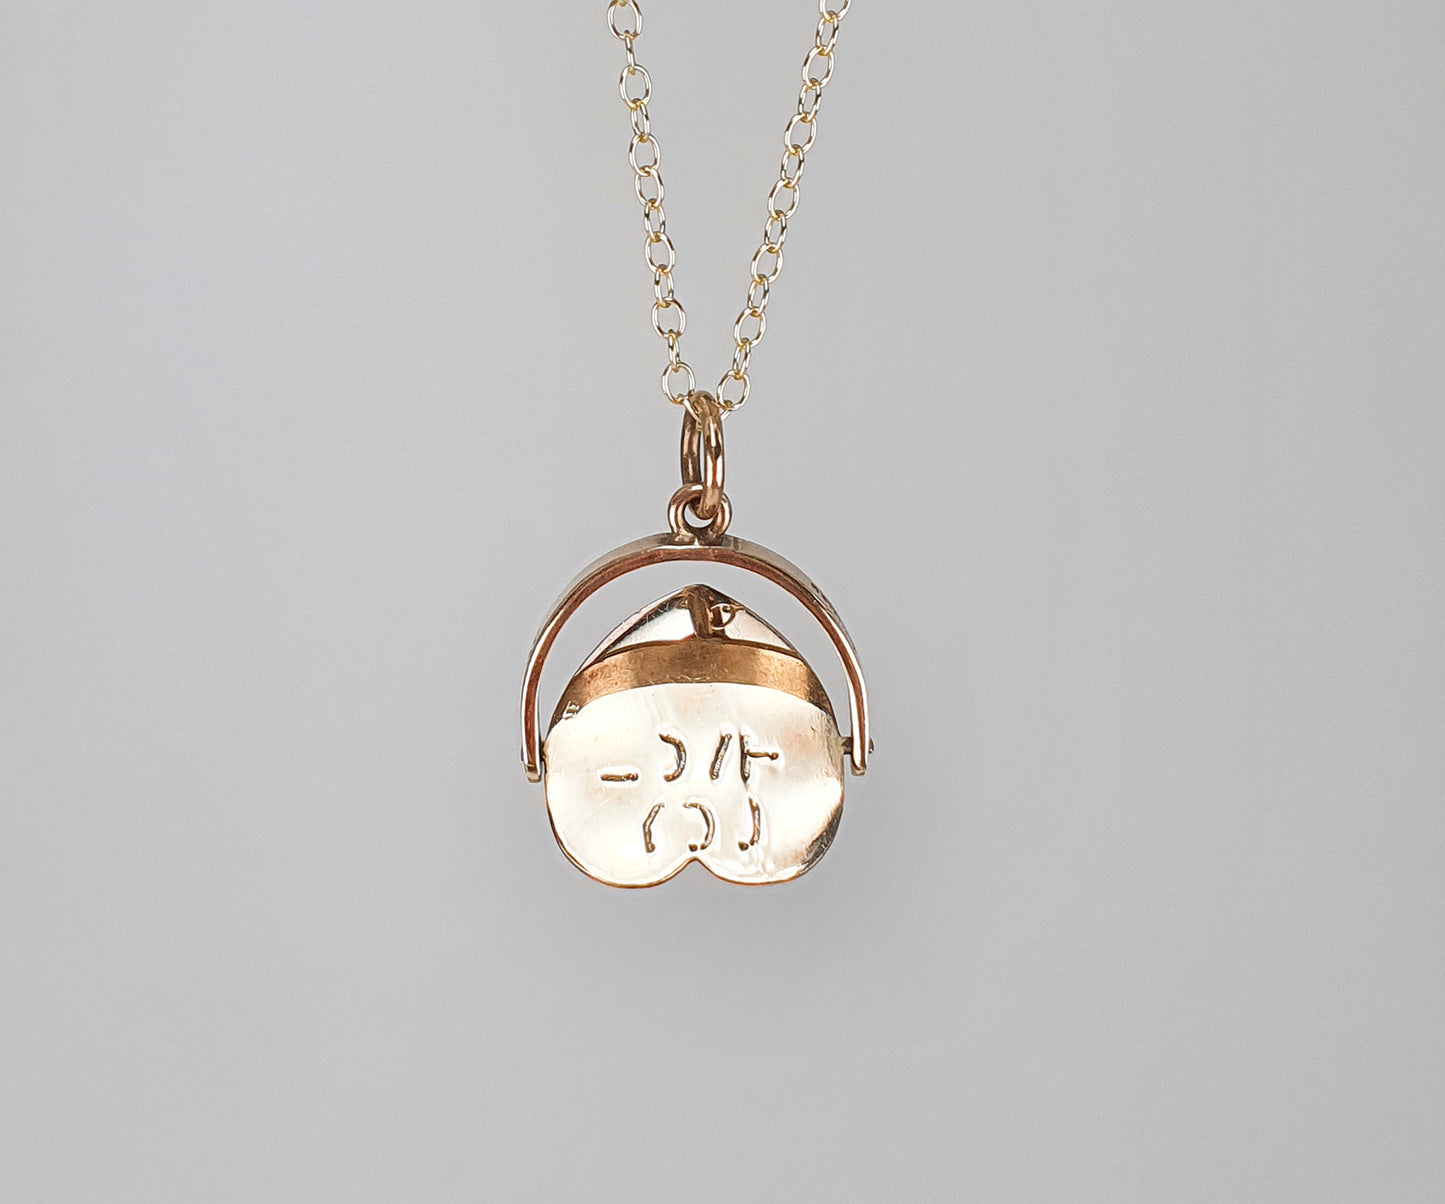 Vintage Heart-Shaped Spinning I Love You Necklace